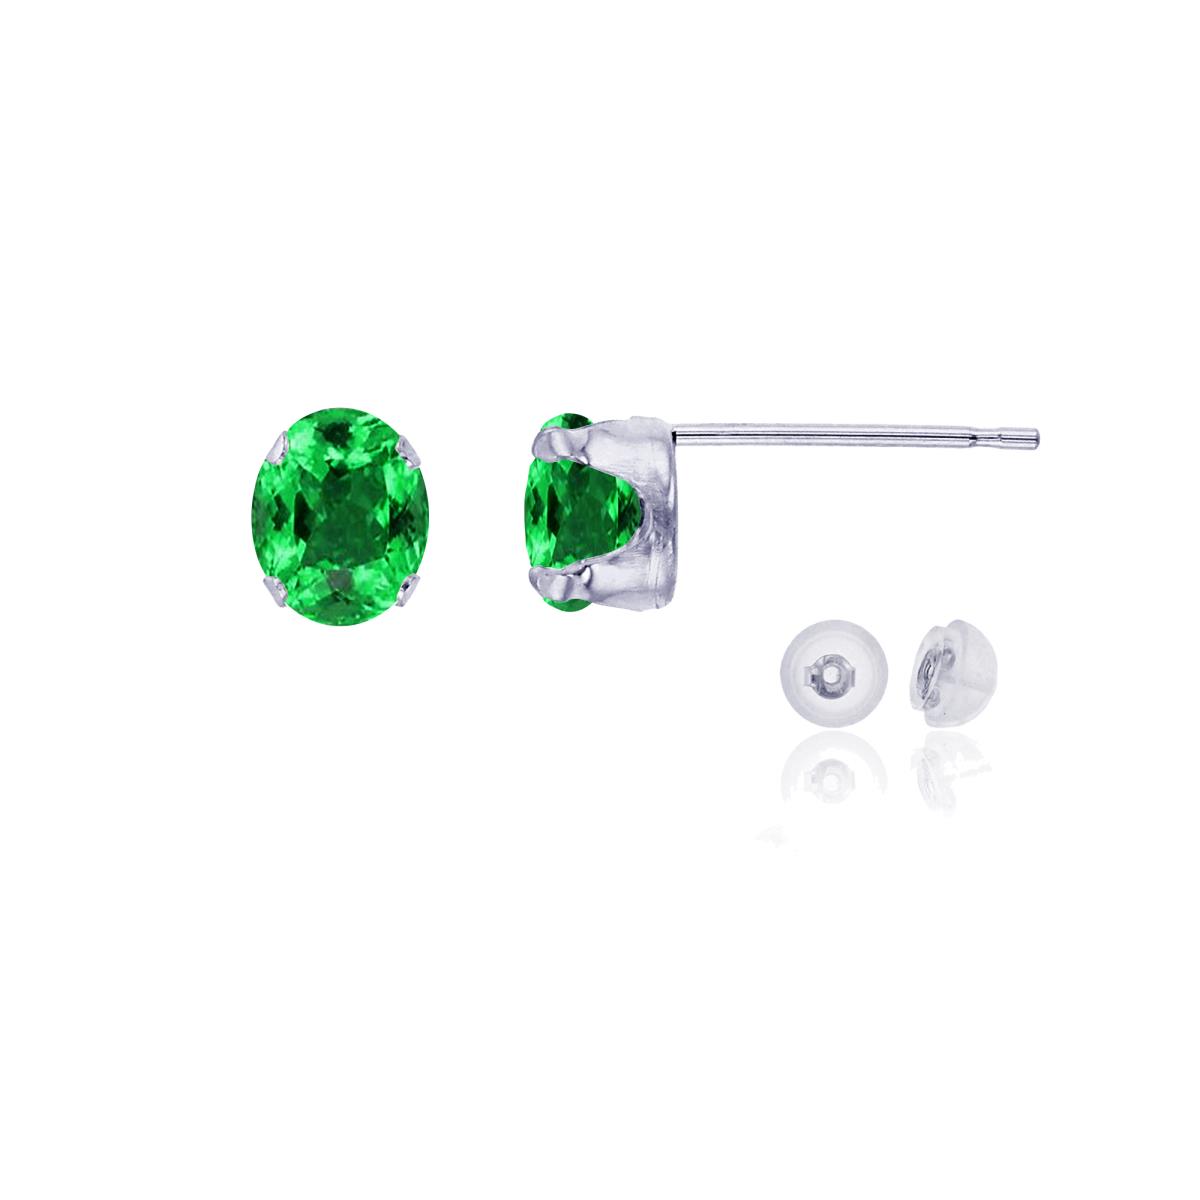 10K White Gold 6x4mm Oval Emerald Stud Earring with Silicone Back